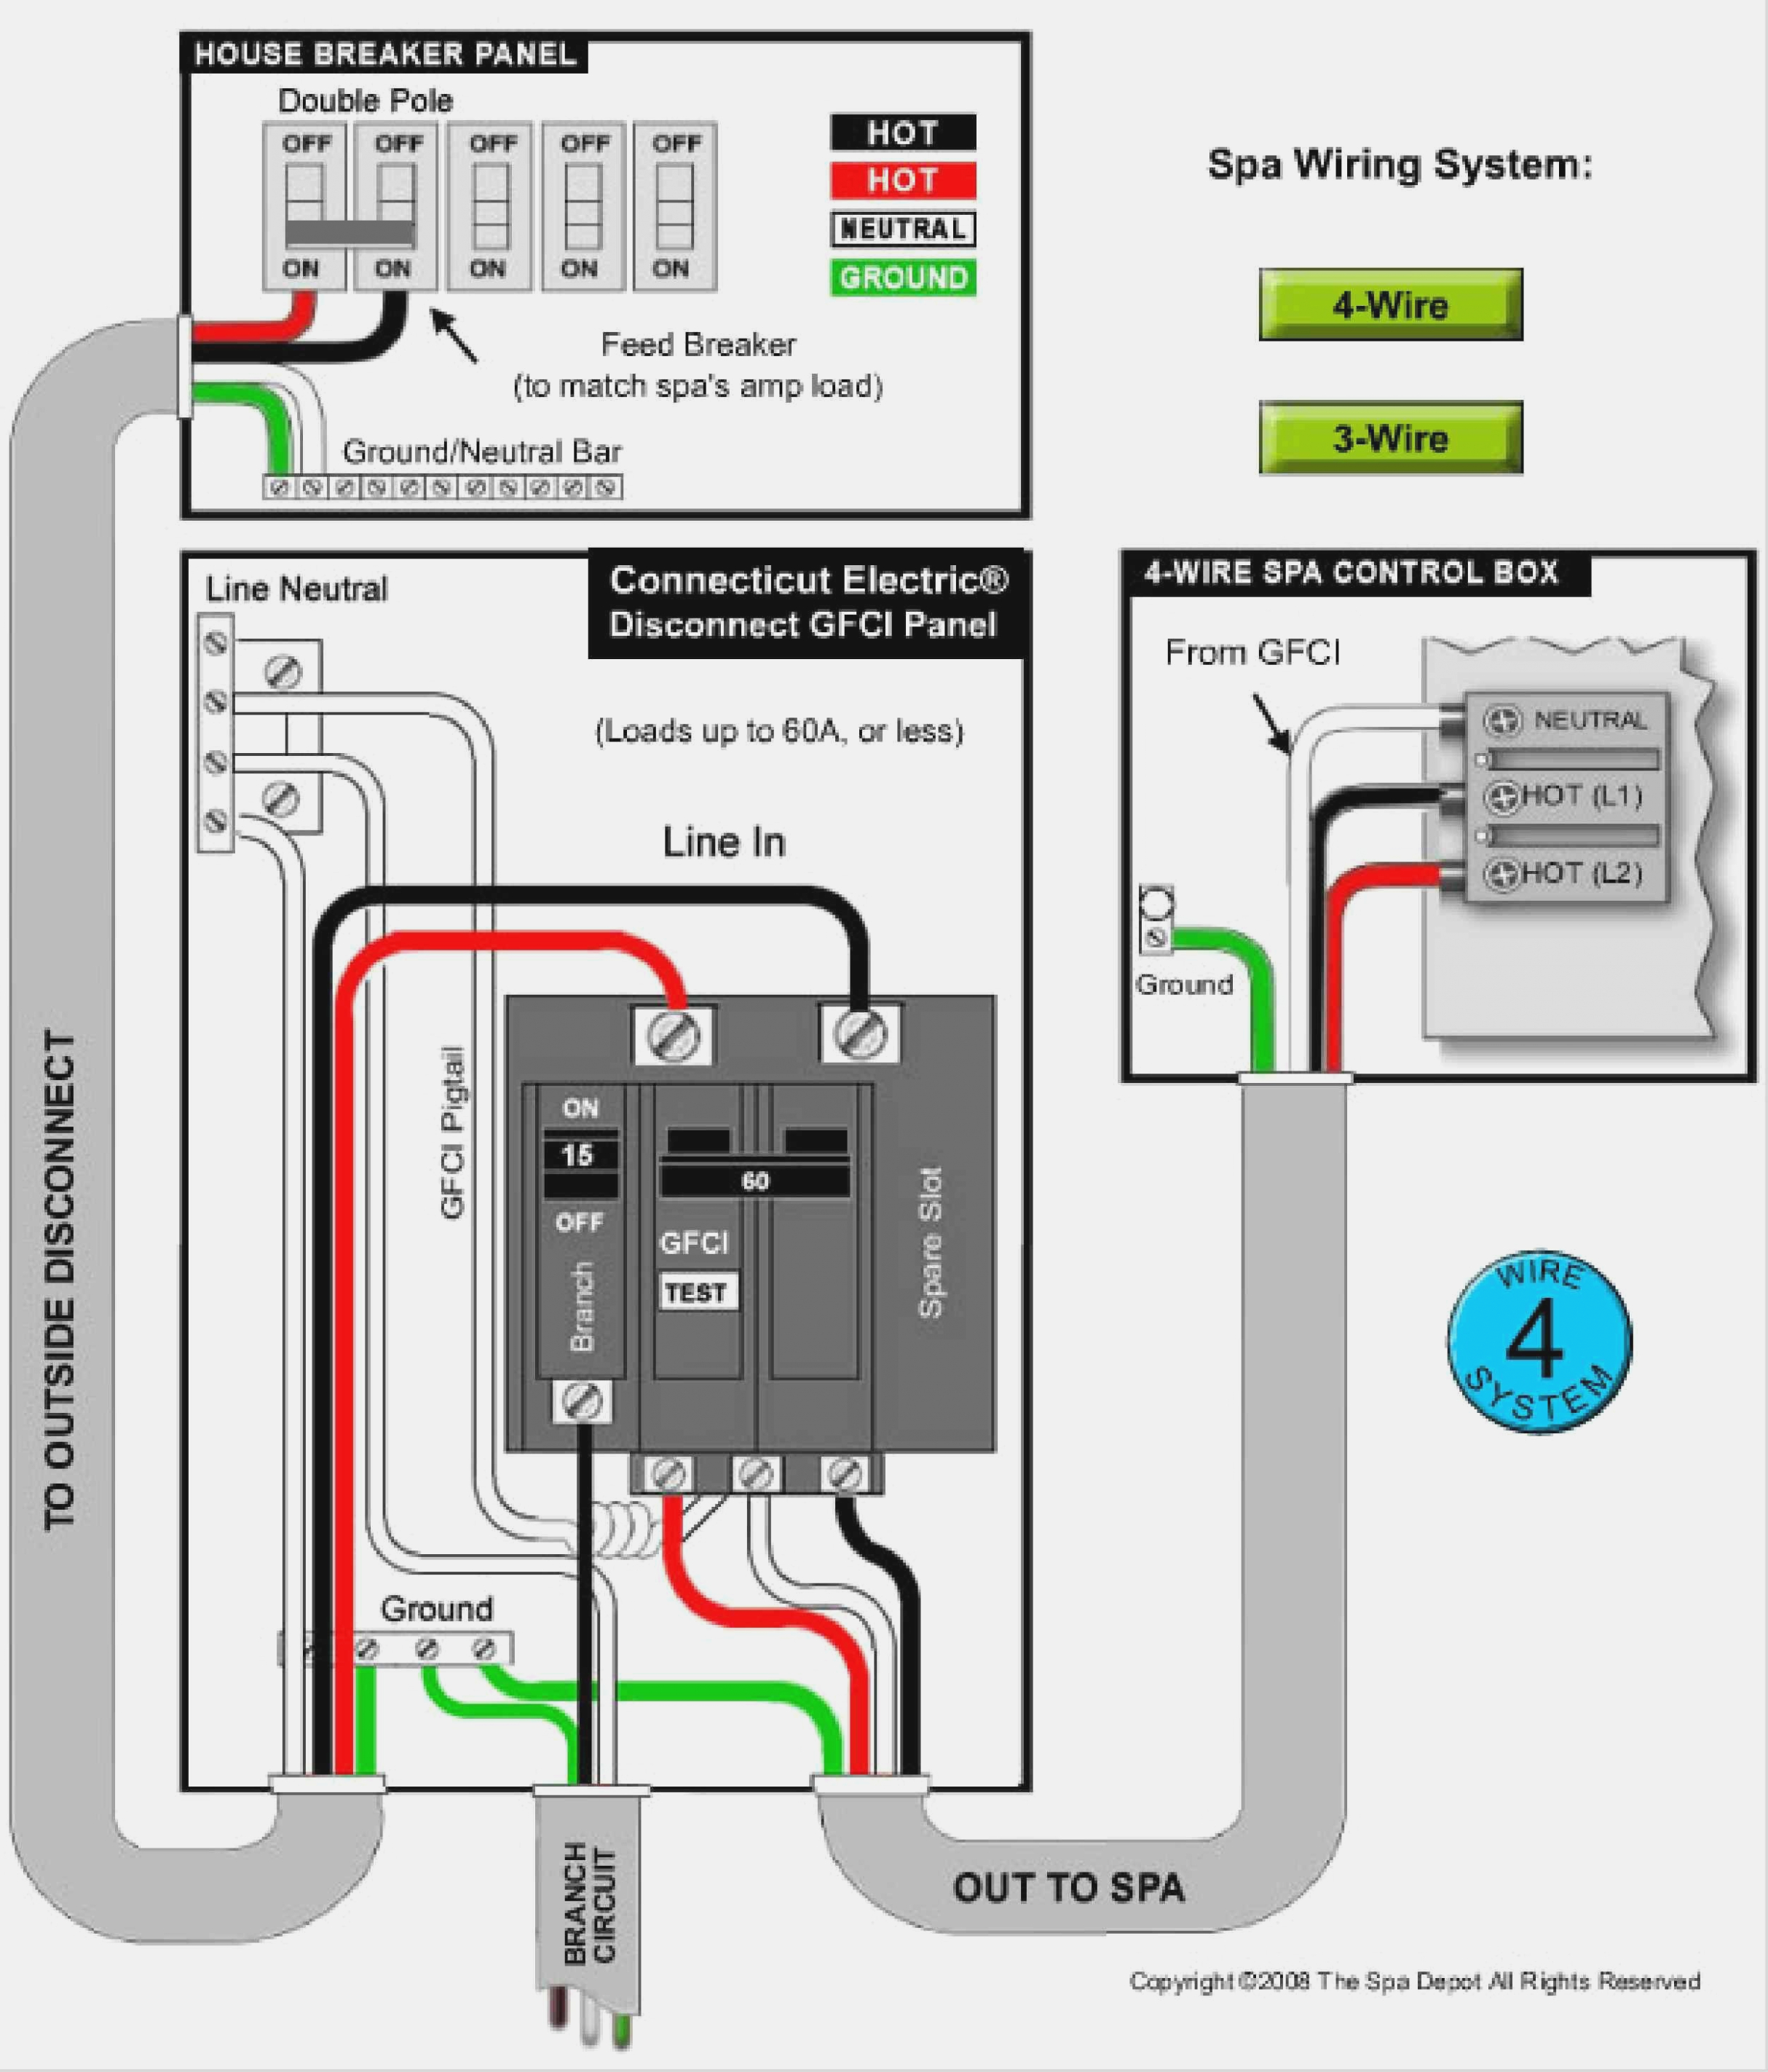 Wiring Diagram For A Gfci Breaker | Wiring Diagram - 2 Pole Gfci Breaker Wiring Diagram